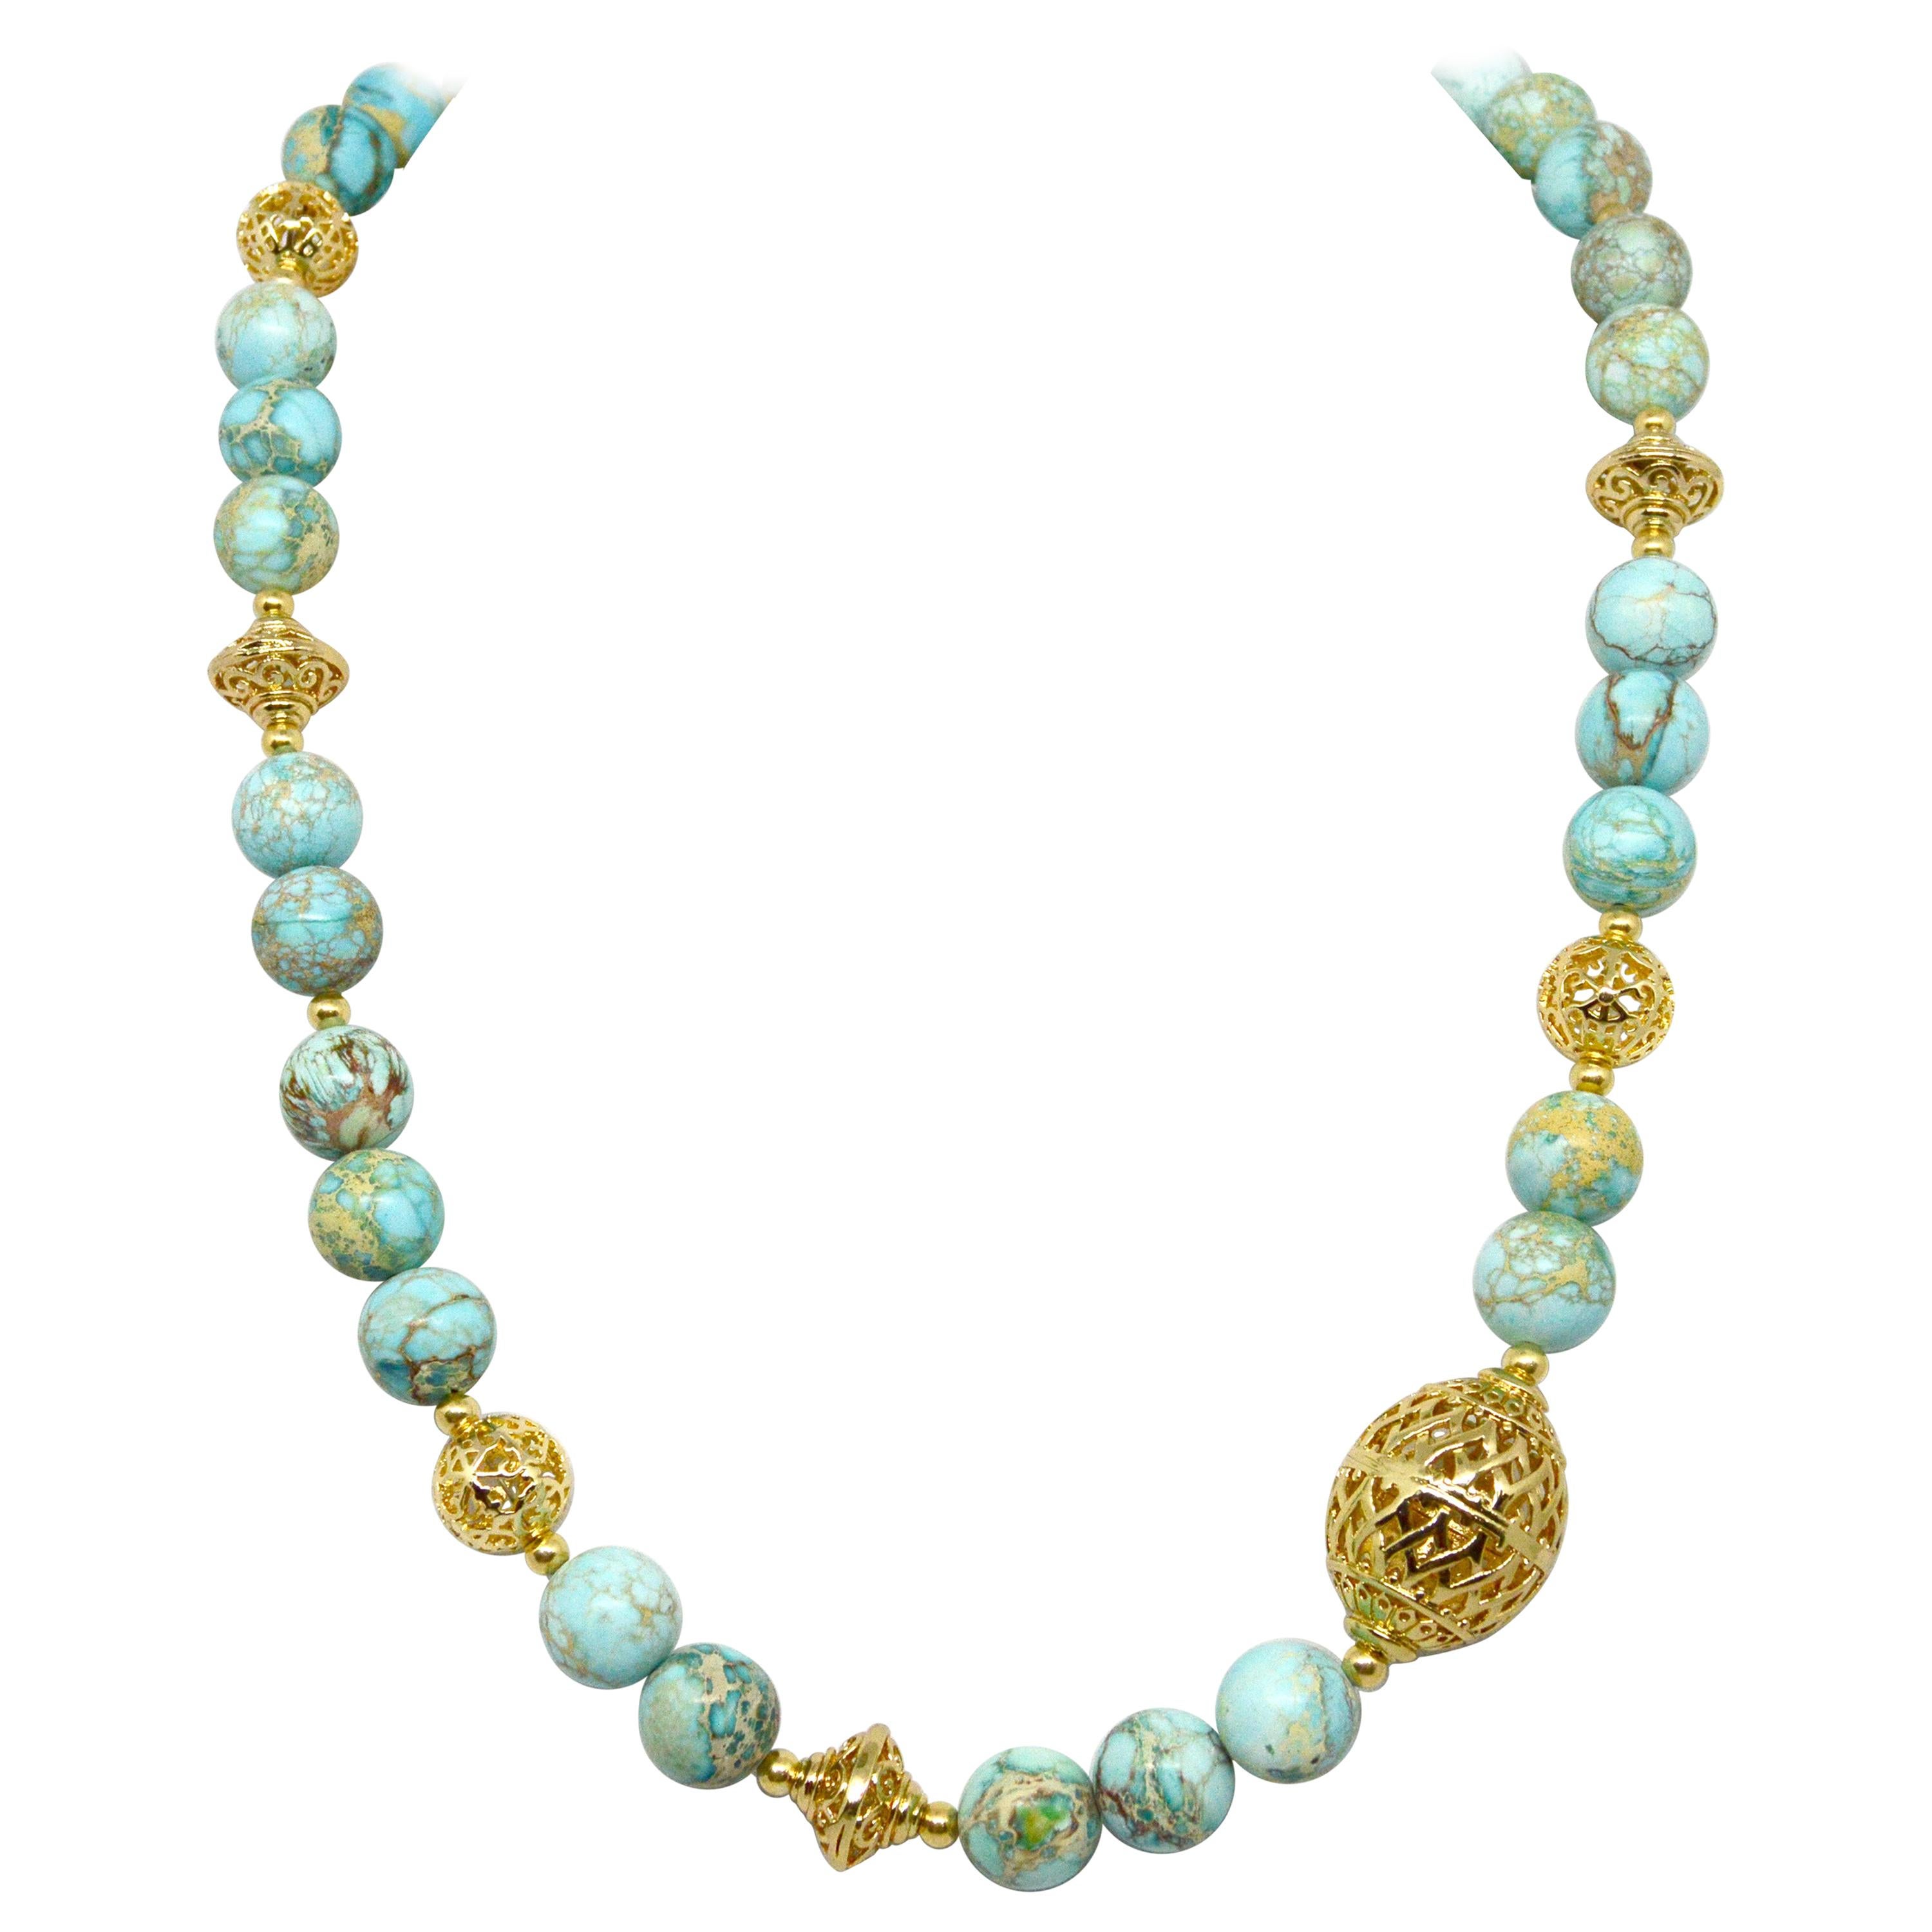 Decadent Jewels Impression Jasper with Statement Gold-Filled Beads Necklace